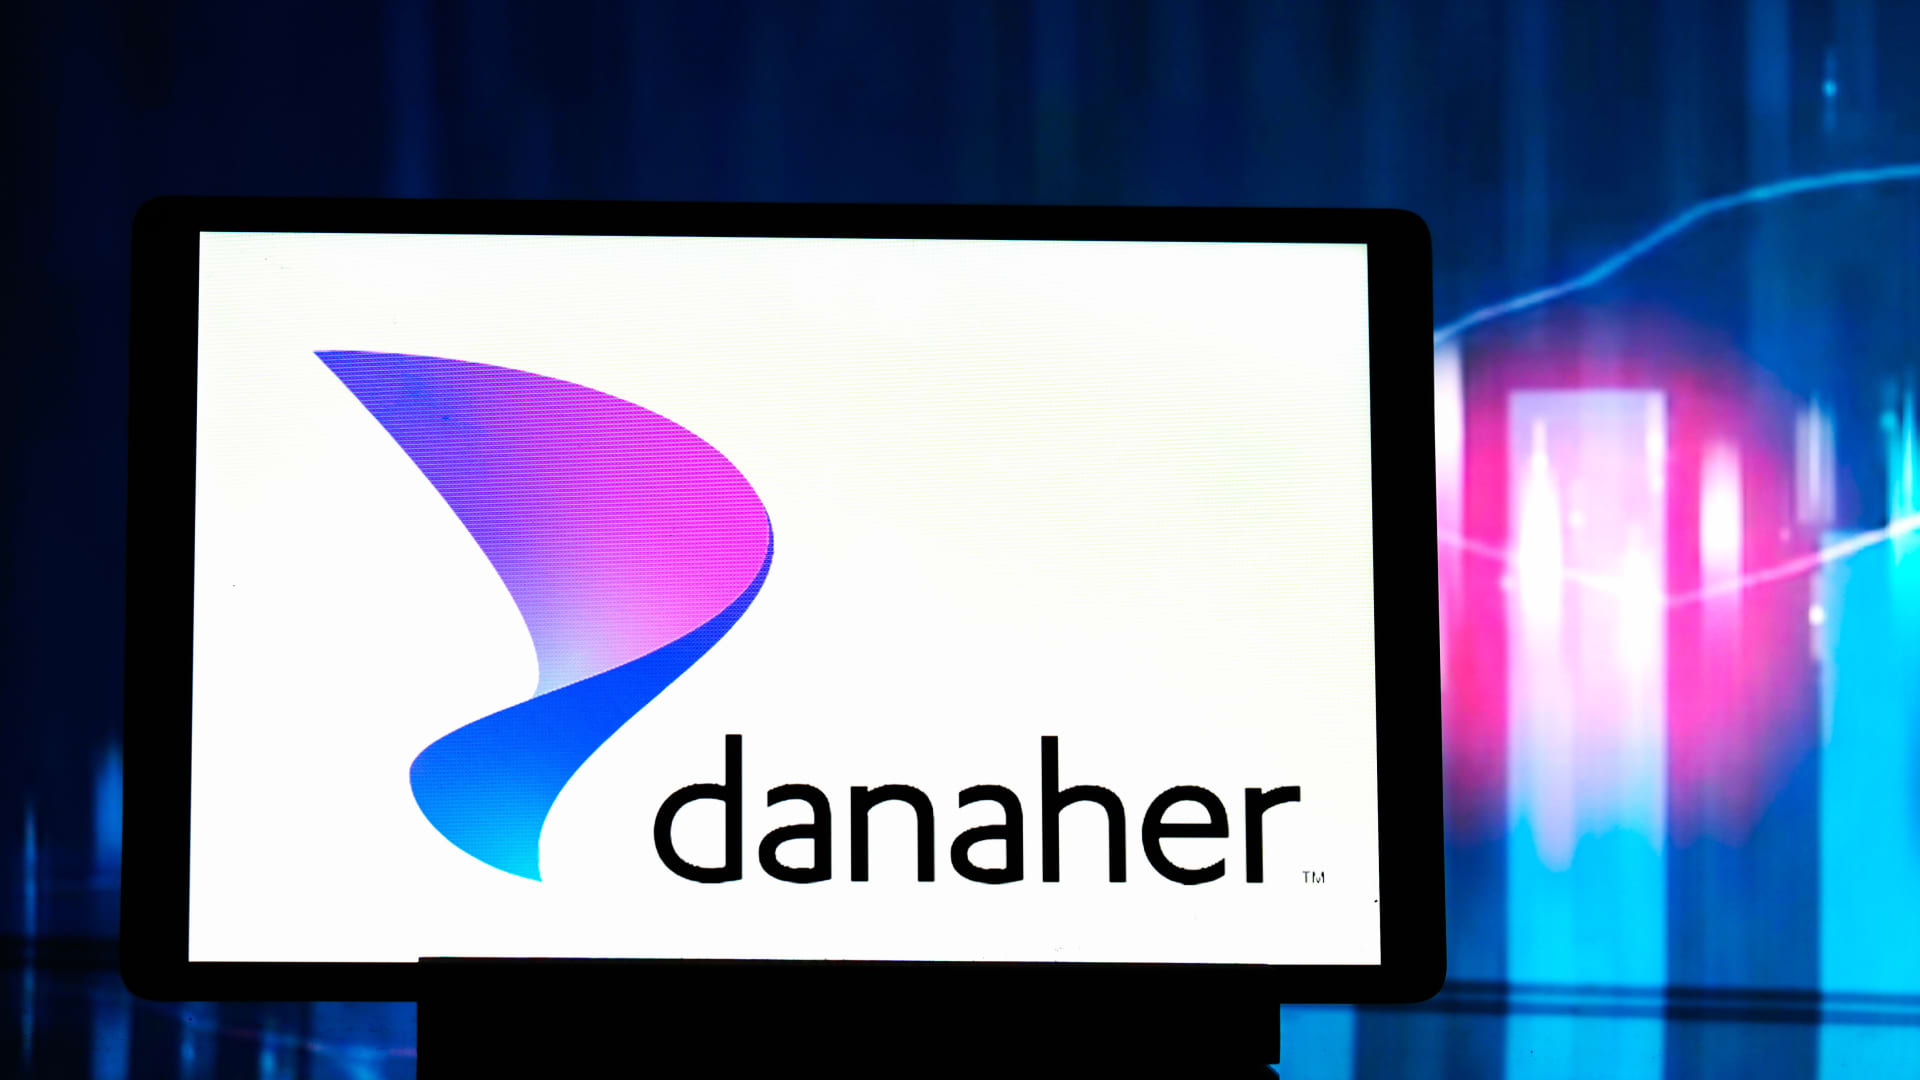 We're raising our price target on Danaher stock as it sheds a major overhang